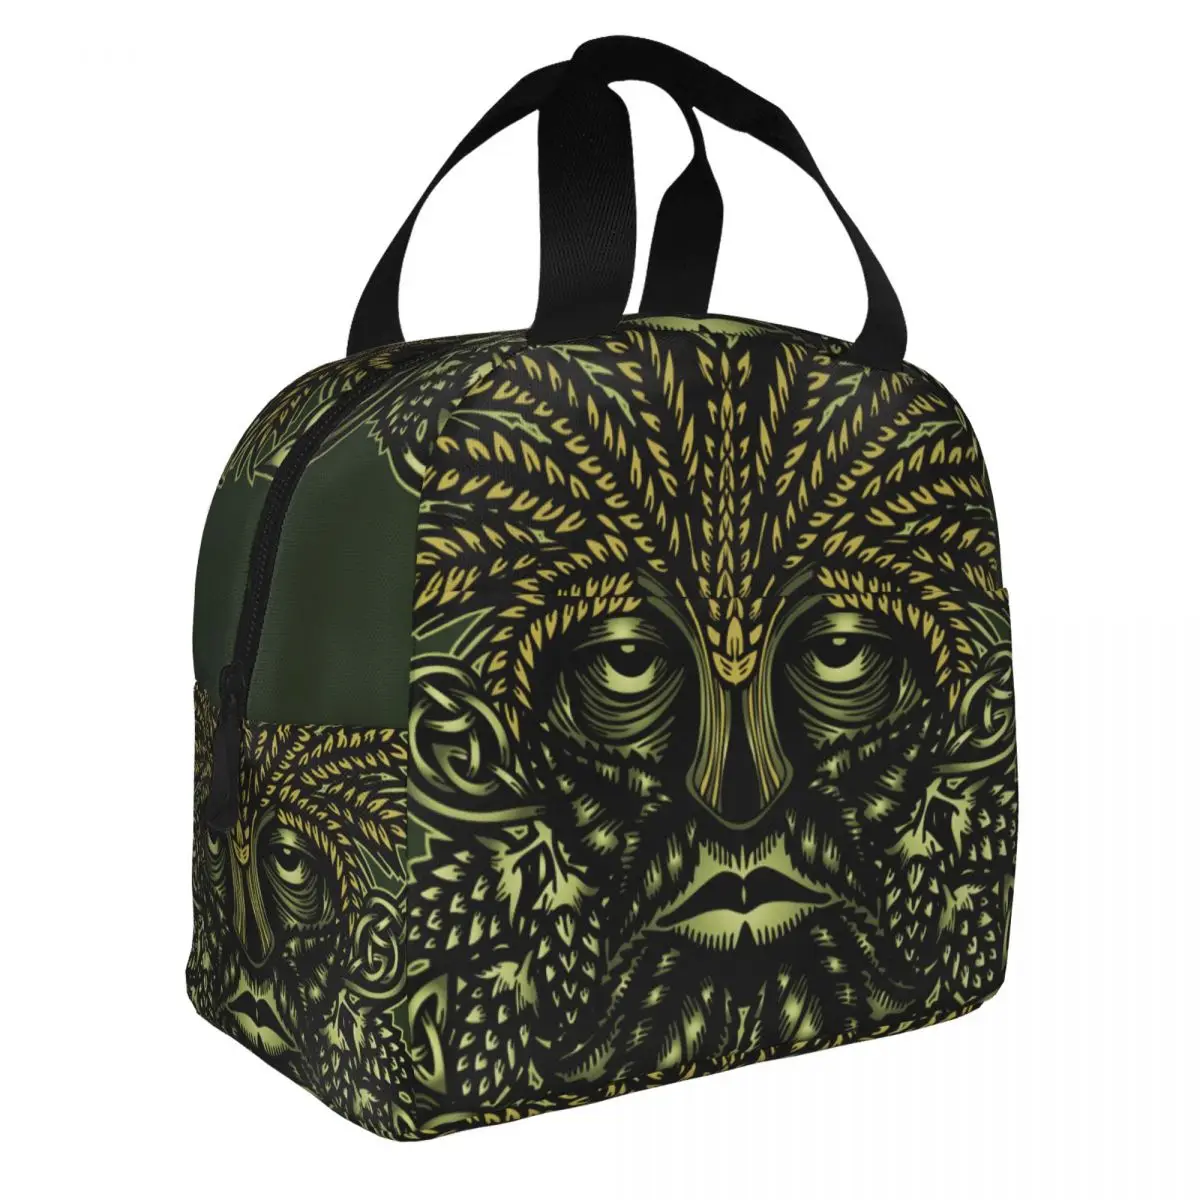 The Hops & Barley Green Man Lunch Bento Bags Portable Aluminum Foil thickened Thermal Cloth Lunch Bag for Women Men Boy